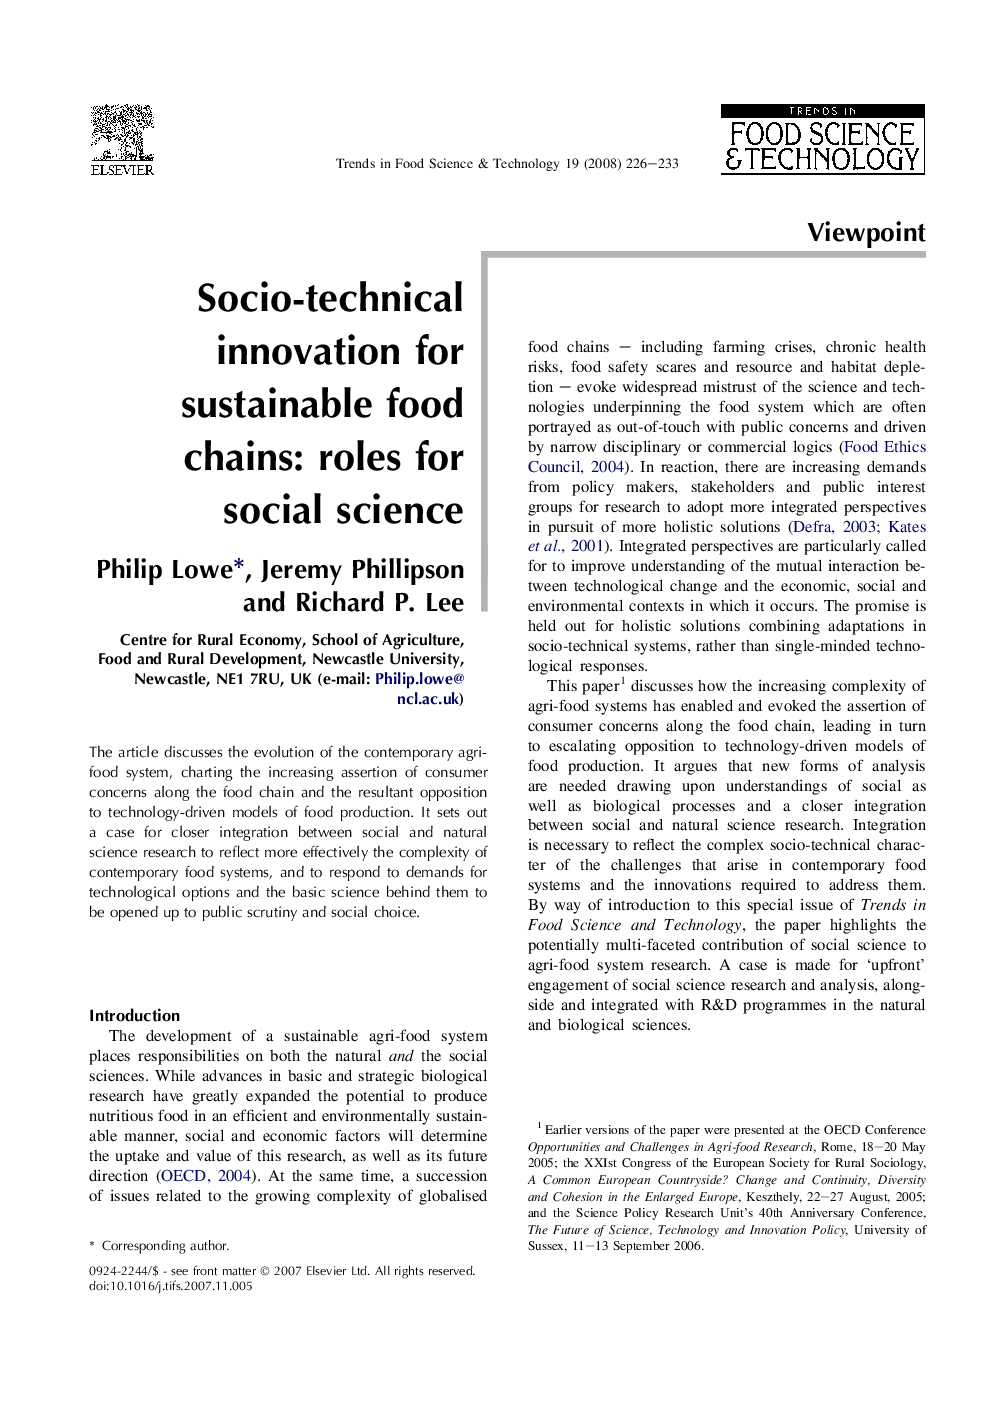 Socio-technical innovation for sustainable food chains: roles for social science